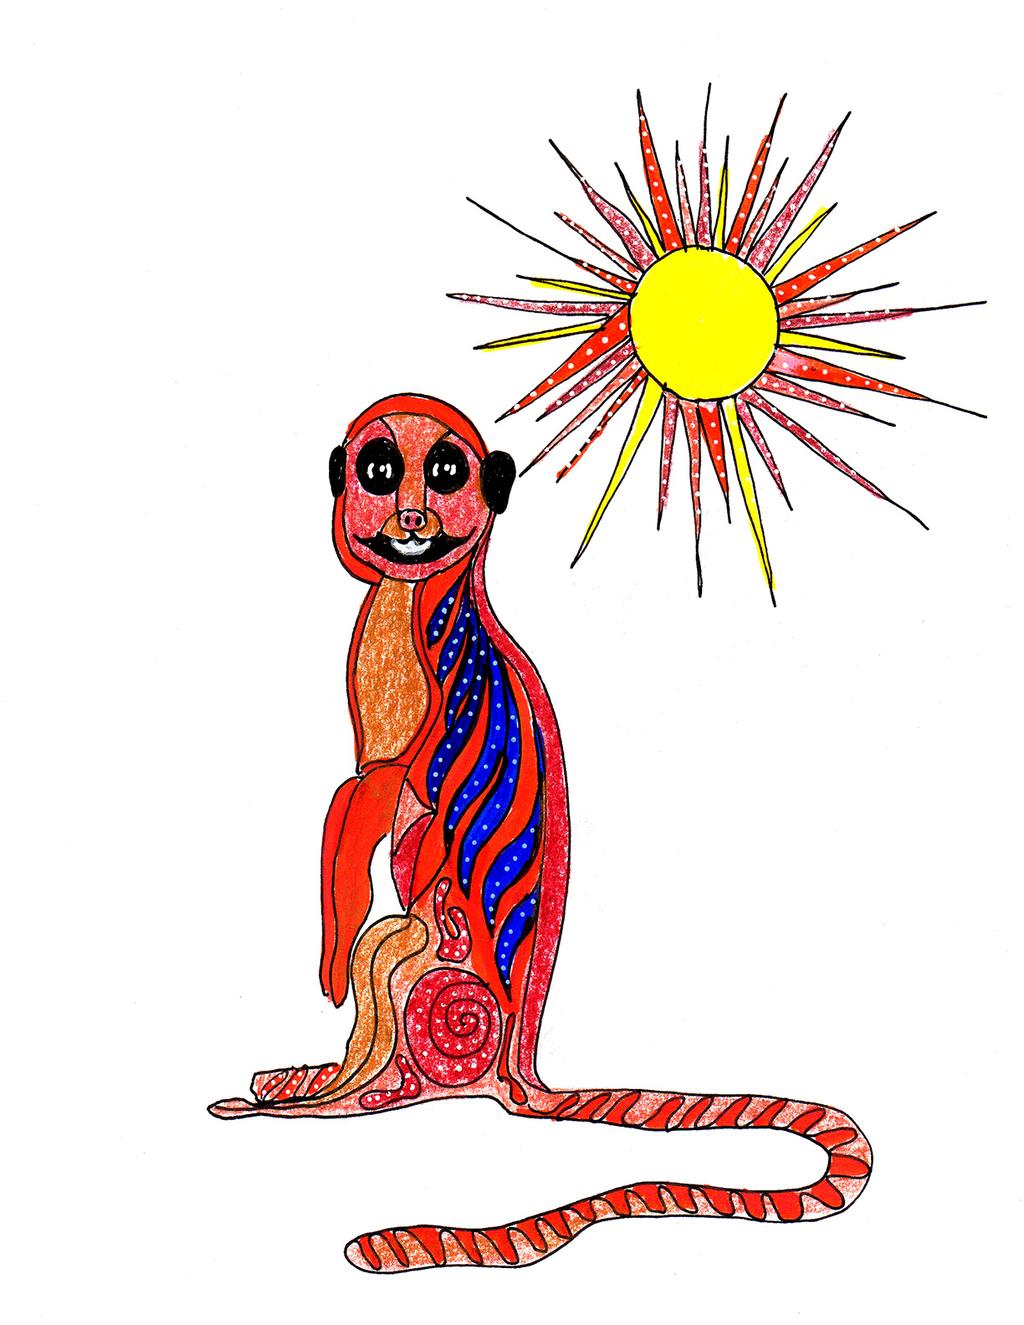 Doodle Extravaganza Day #22! Meerkat Meerkat! What whimsical creatures bring a twinkle to your eye? Today, try doodling funny creatures that delight you...real or imagined. you'est you!